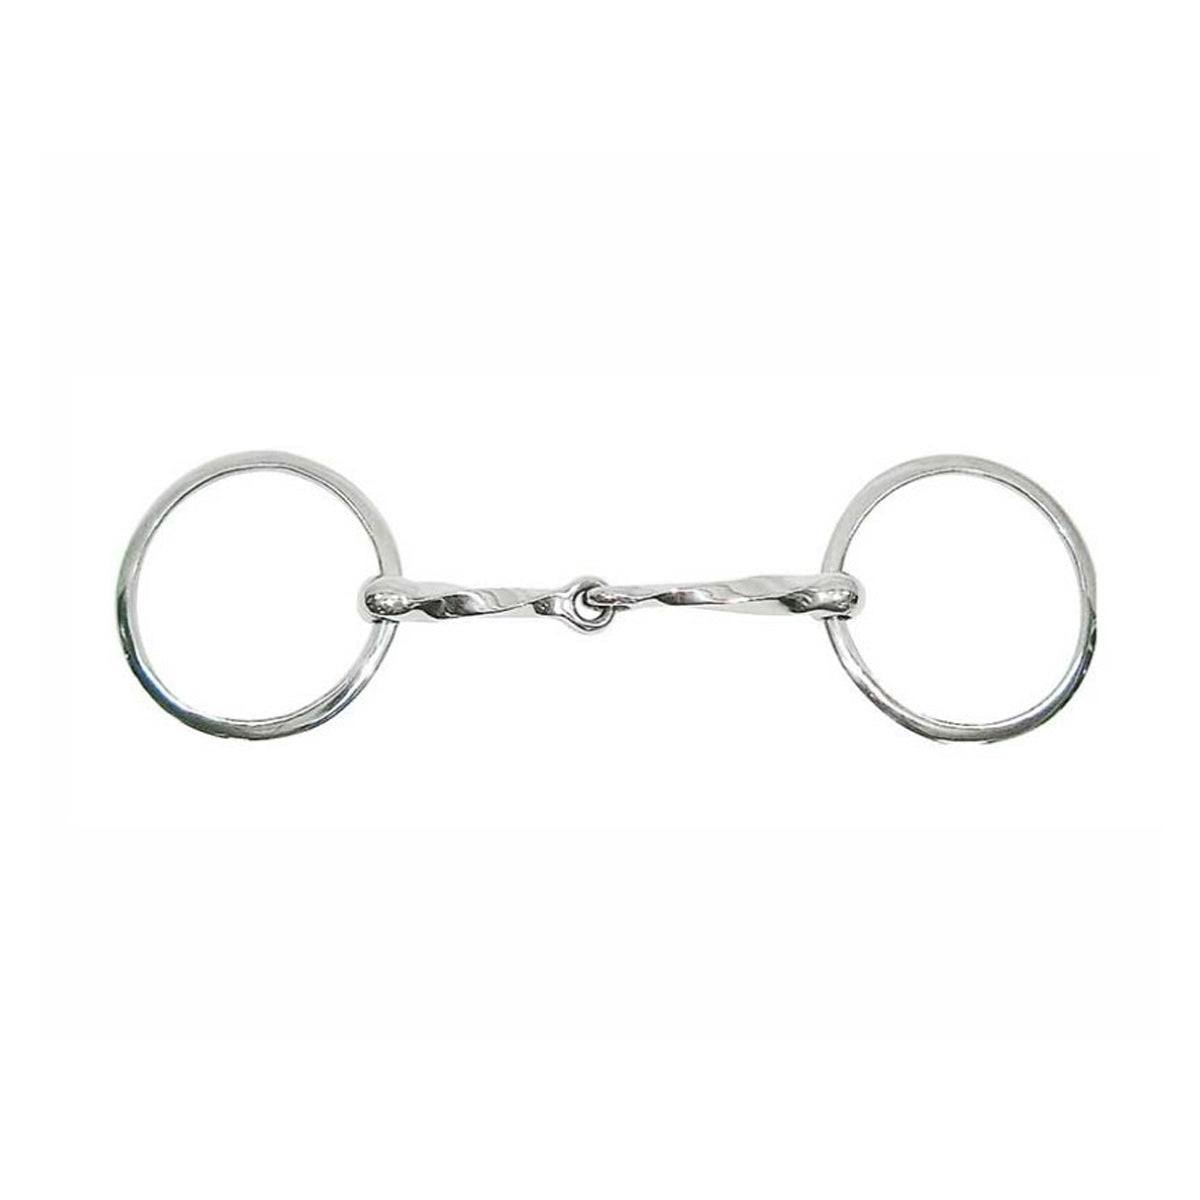 MetaLab Magic System Coarse Twisted Loose Ring Snaffle